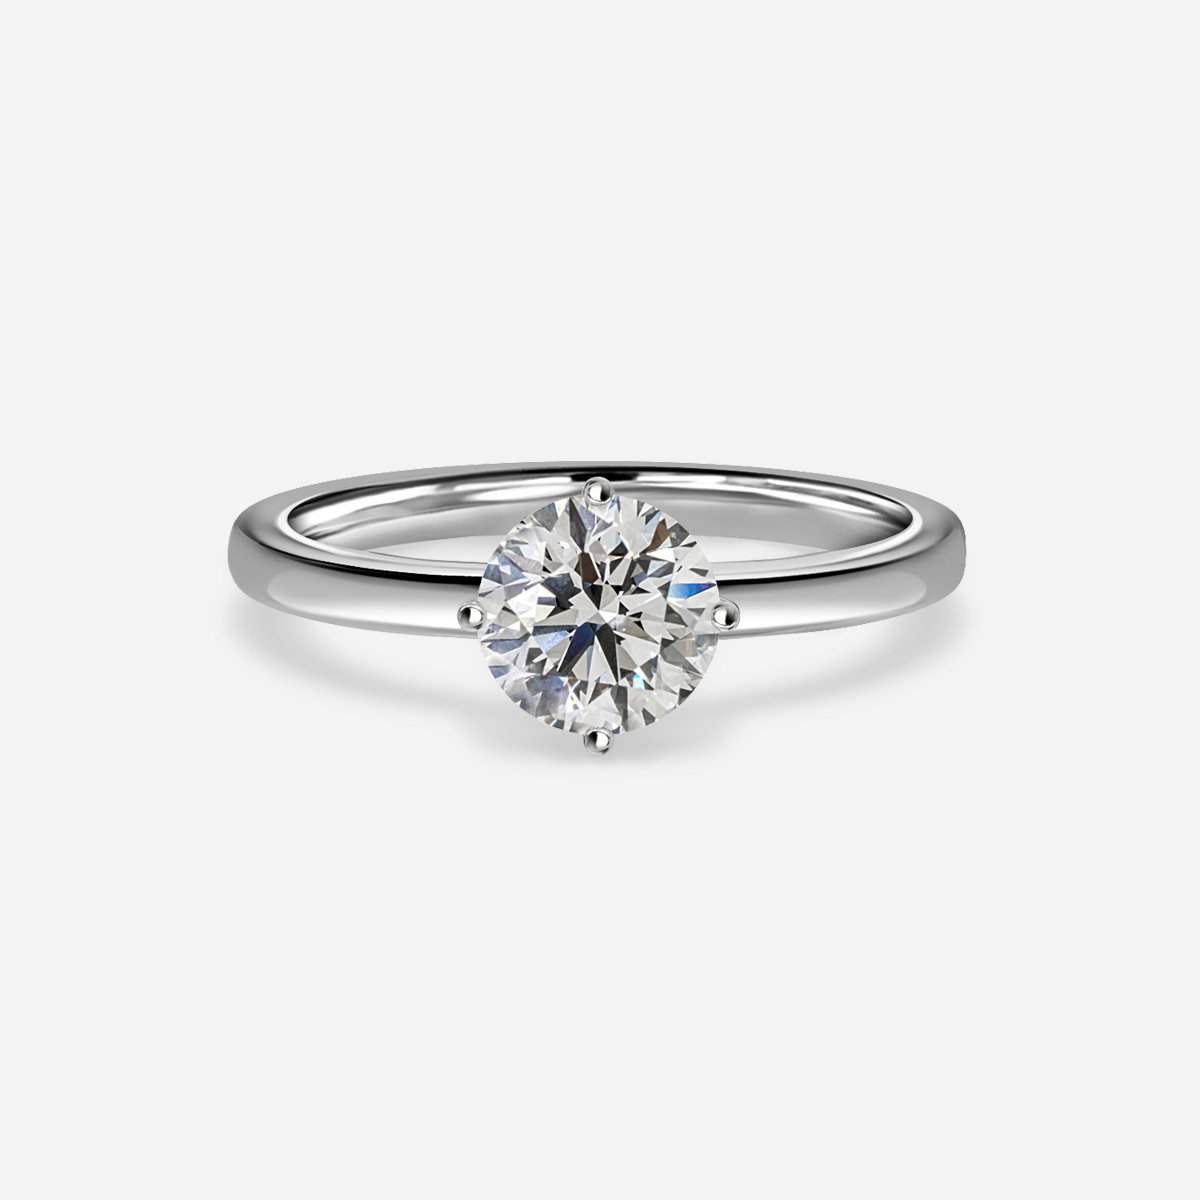 Viana White Gold Solitaire Engagement Ring